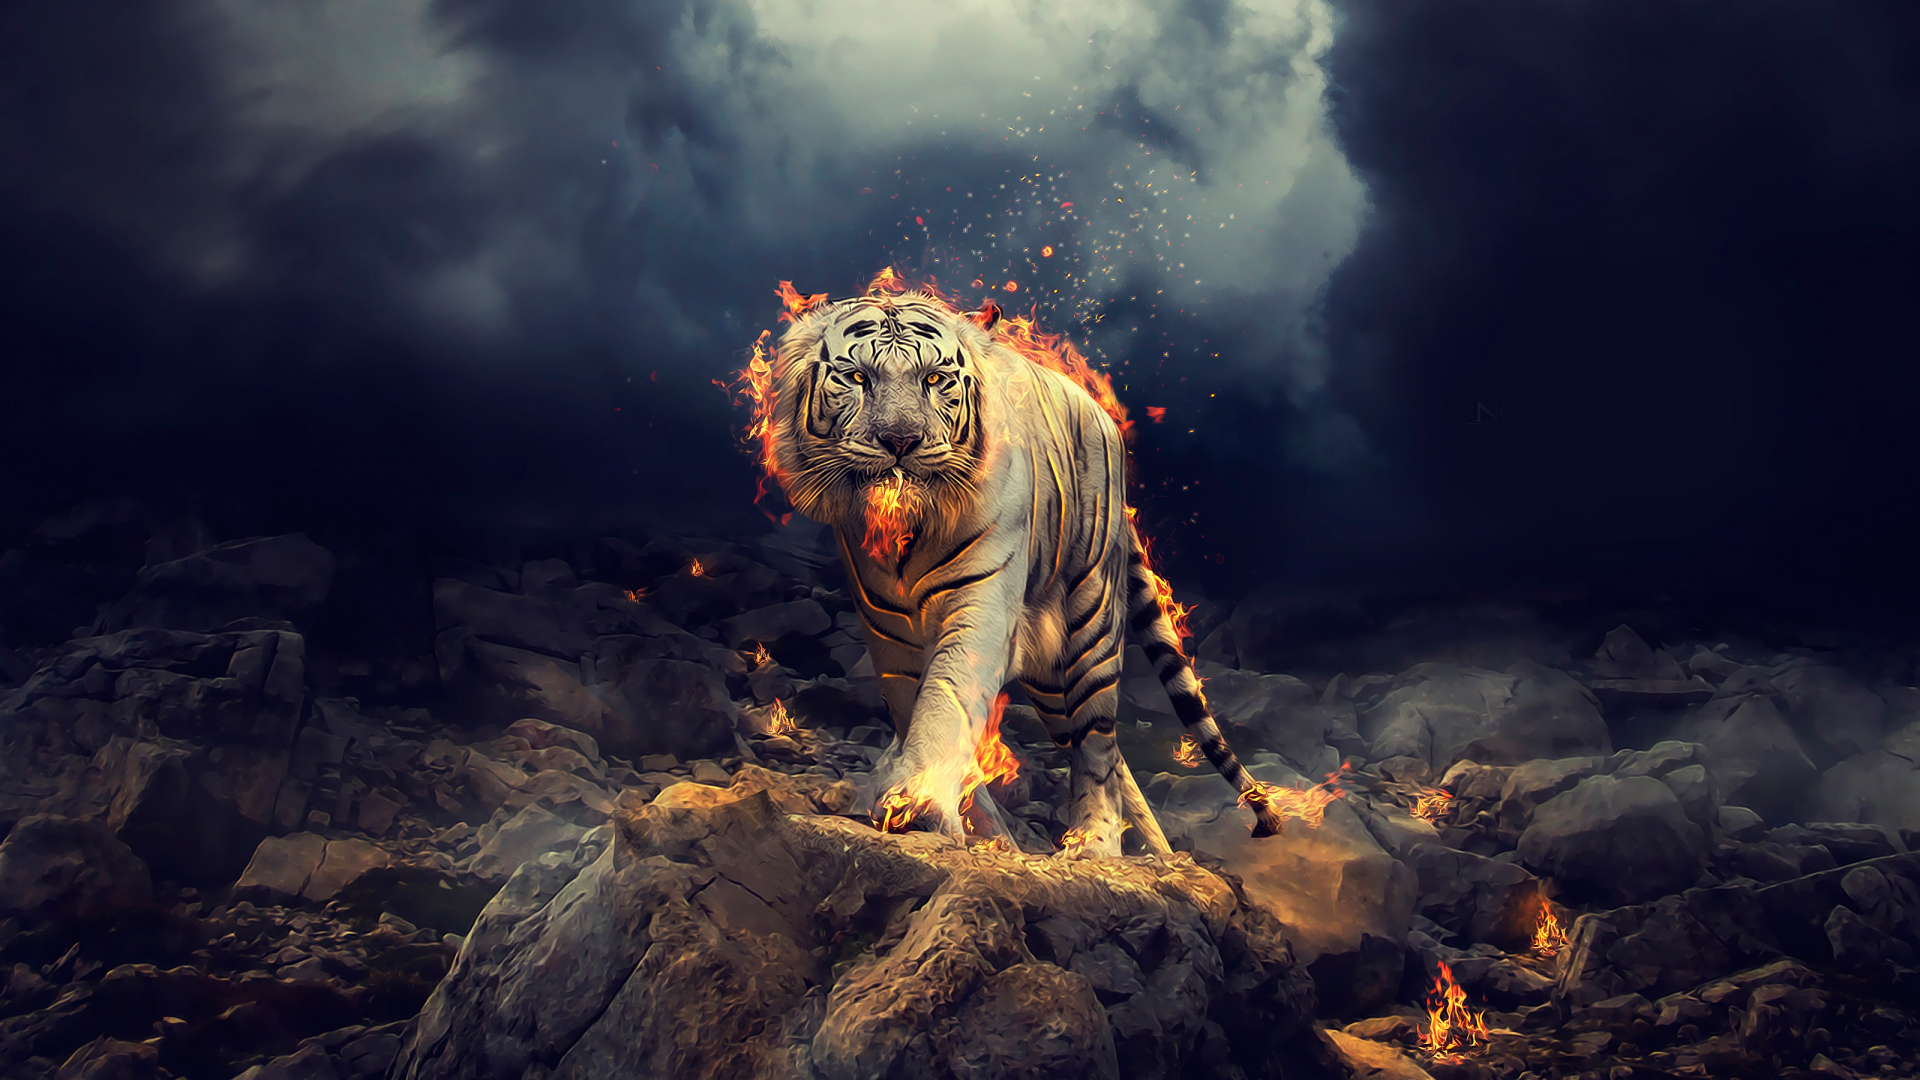 Download 1920x1080 wallpaper angry, raging, white tiger, full hd, hdtv